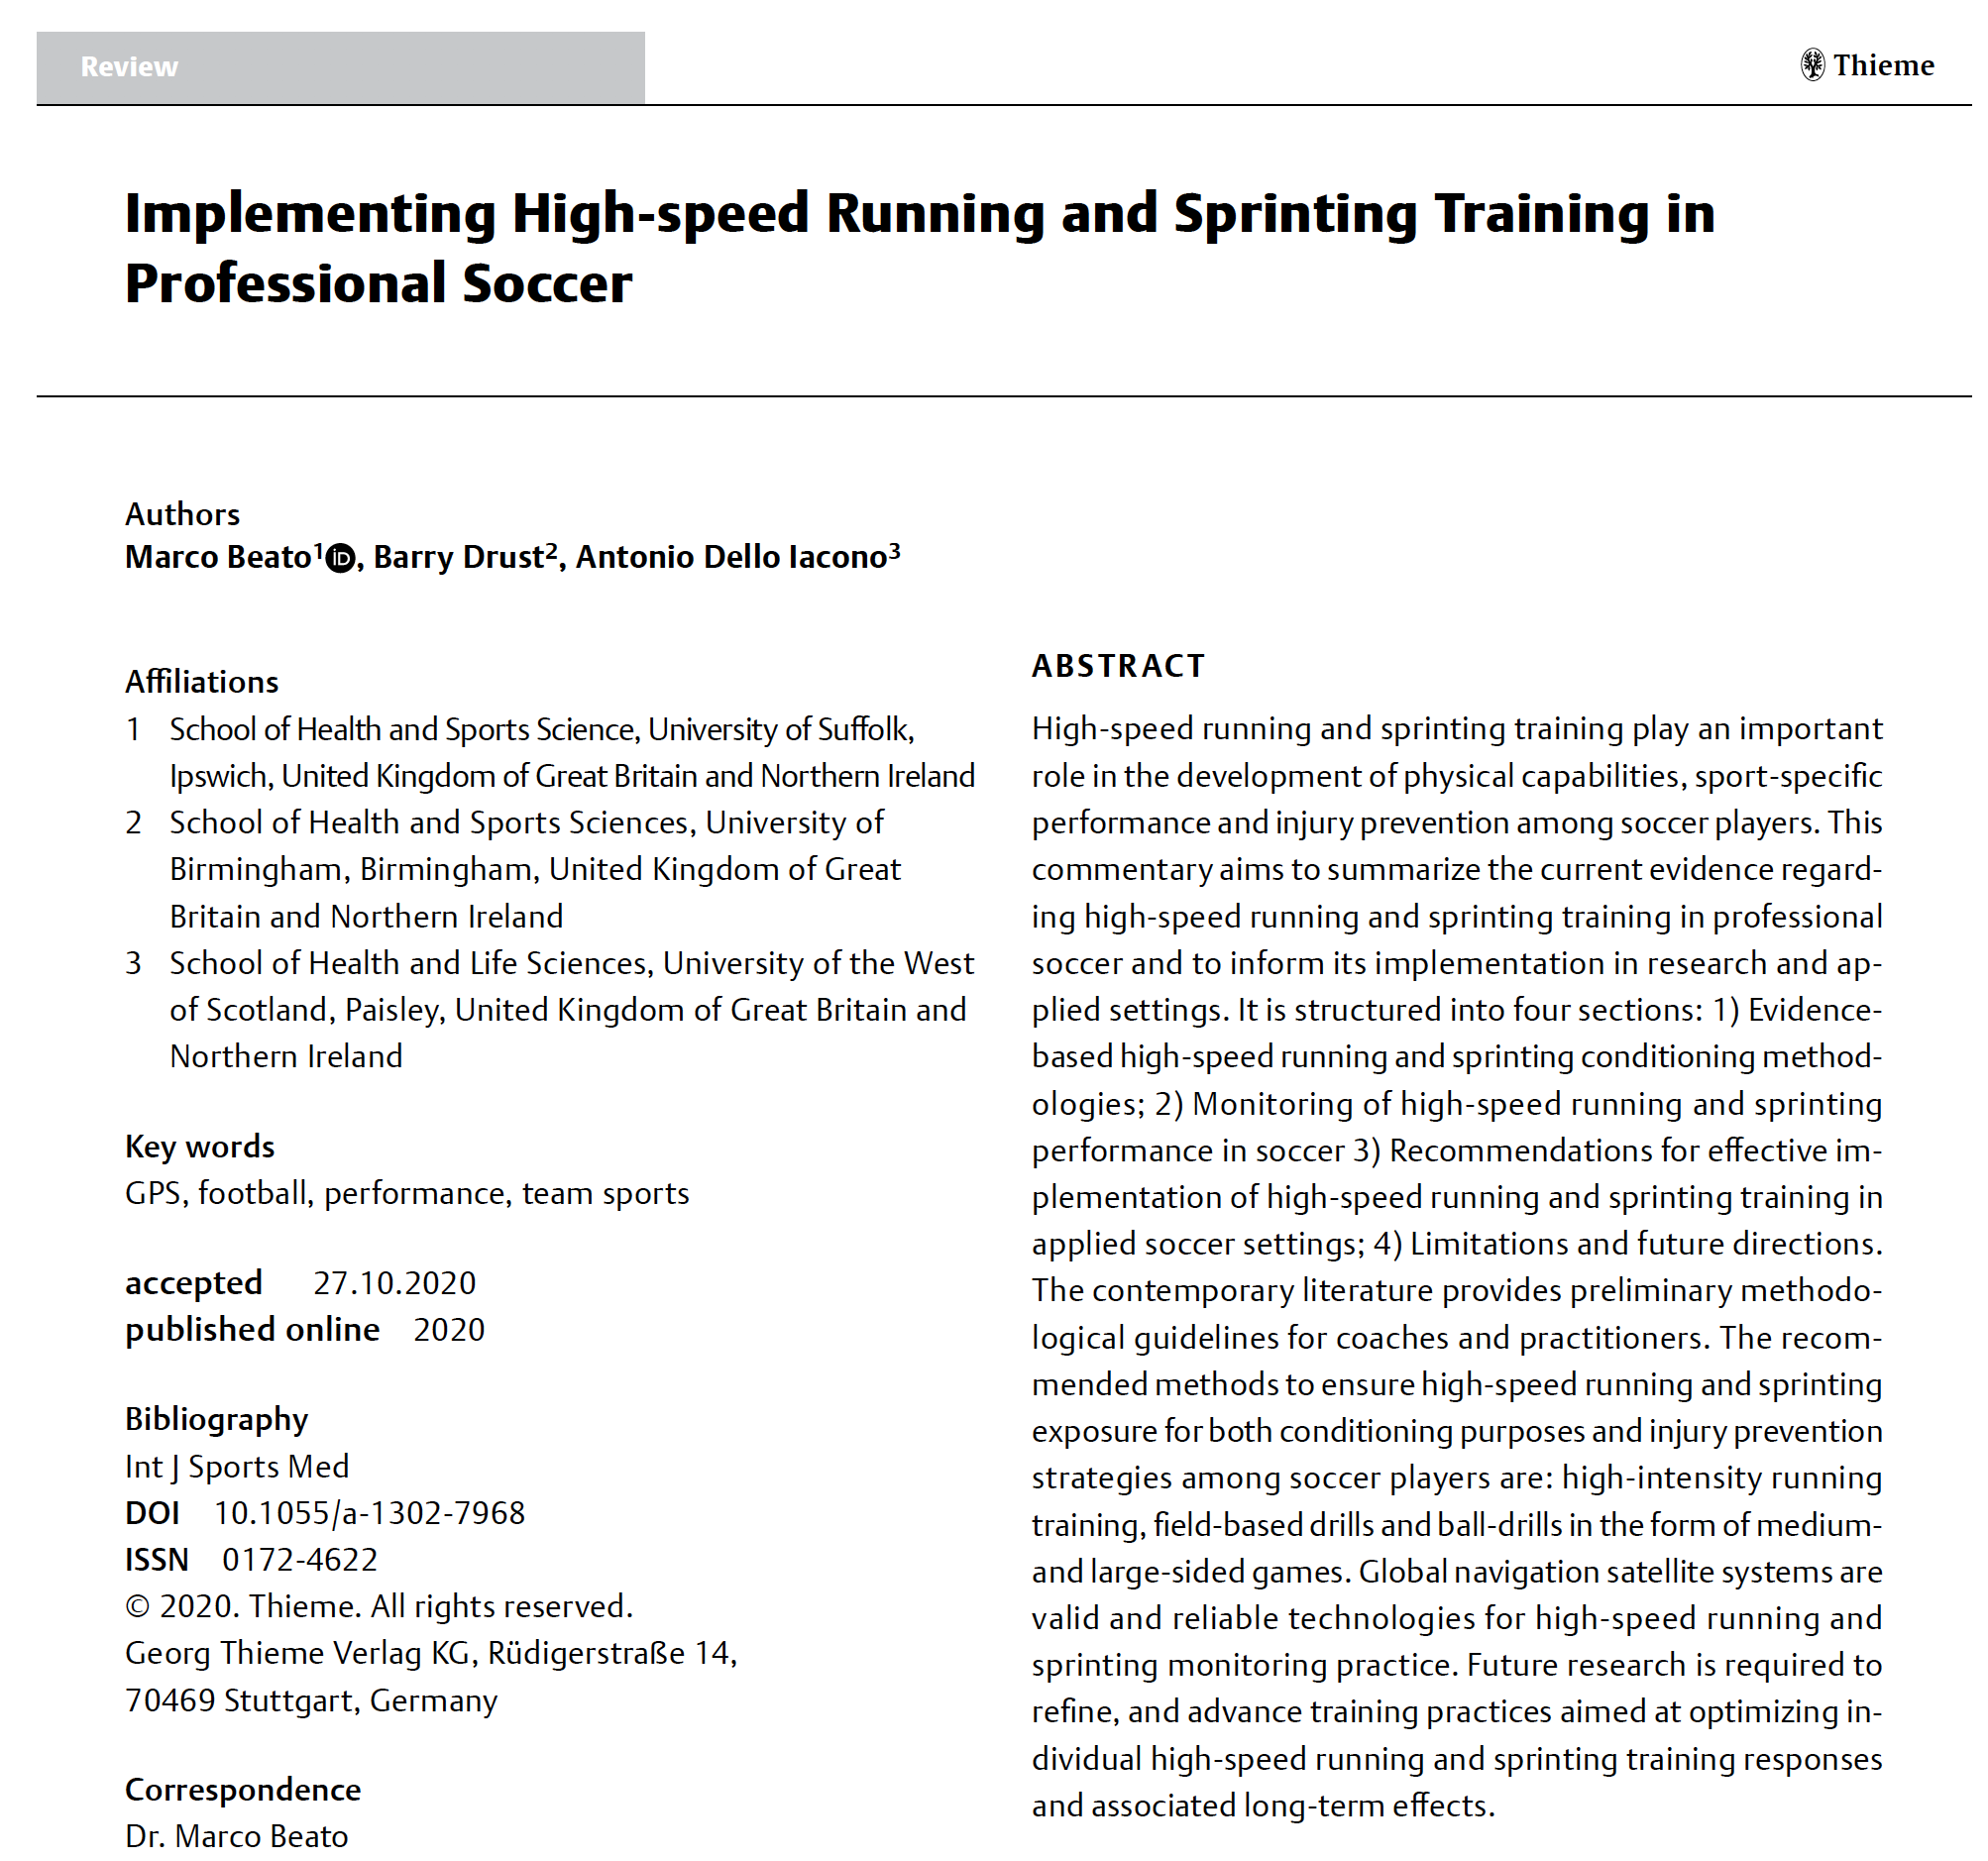 HIGH-SPEED RUNNING & SPRINTING TRAINING IN SOCCER BY MARCO BEATO